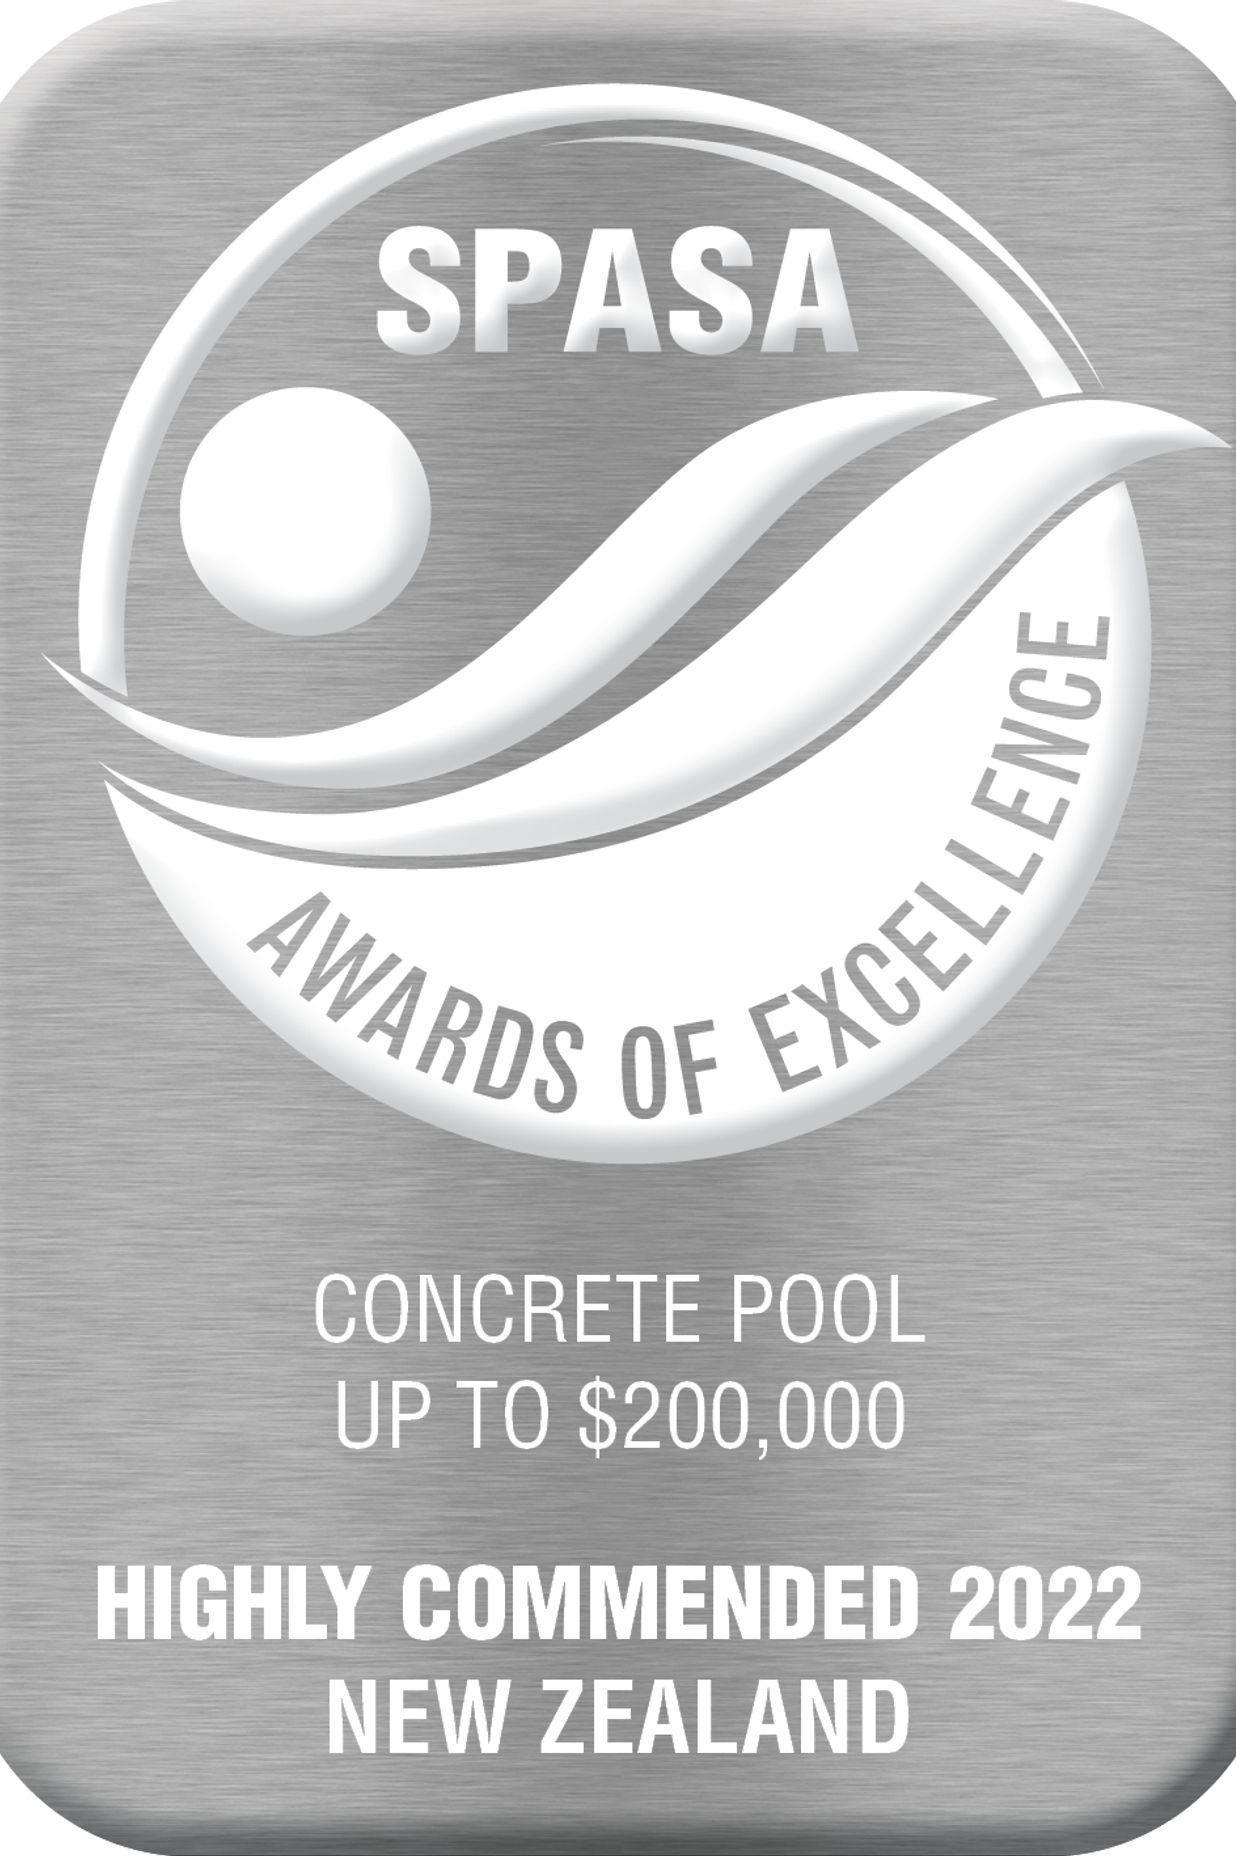 Shelley Park Project received Highly Commended at the SPASA NZ Awards of Excellence 2022